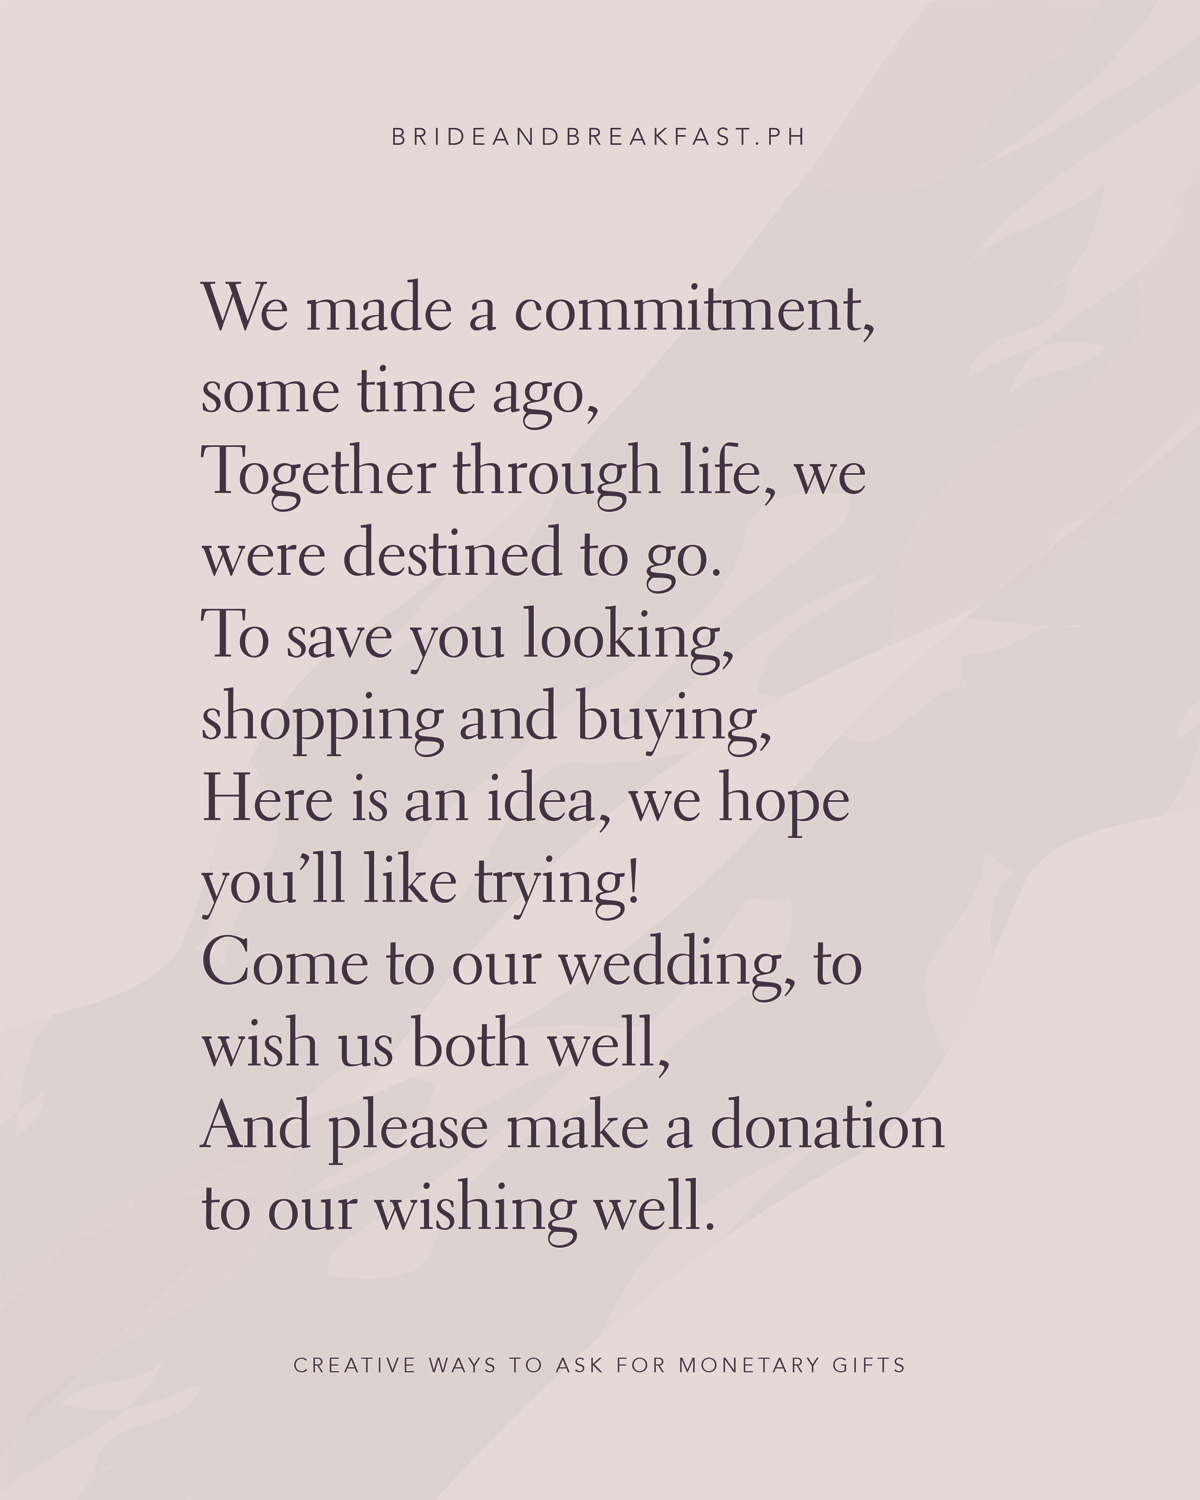 We made a commitment, some time ago, Together through life, we were destined to go. To save you looking, shopping and buying, Here is an idea, we hope you’ll like trying! Come to our wedding, to wish us both well, And please make a donation to our wishing well.